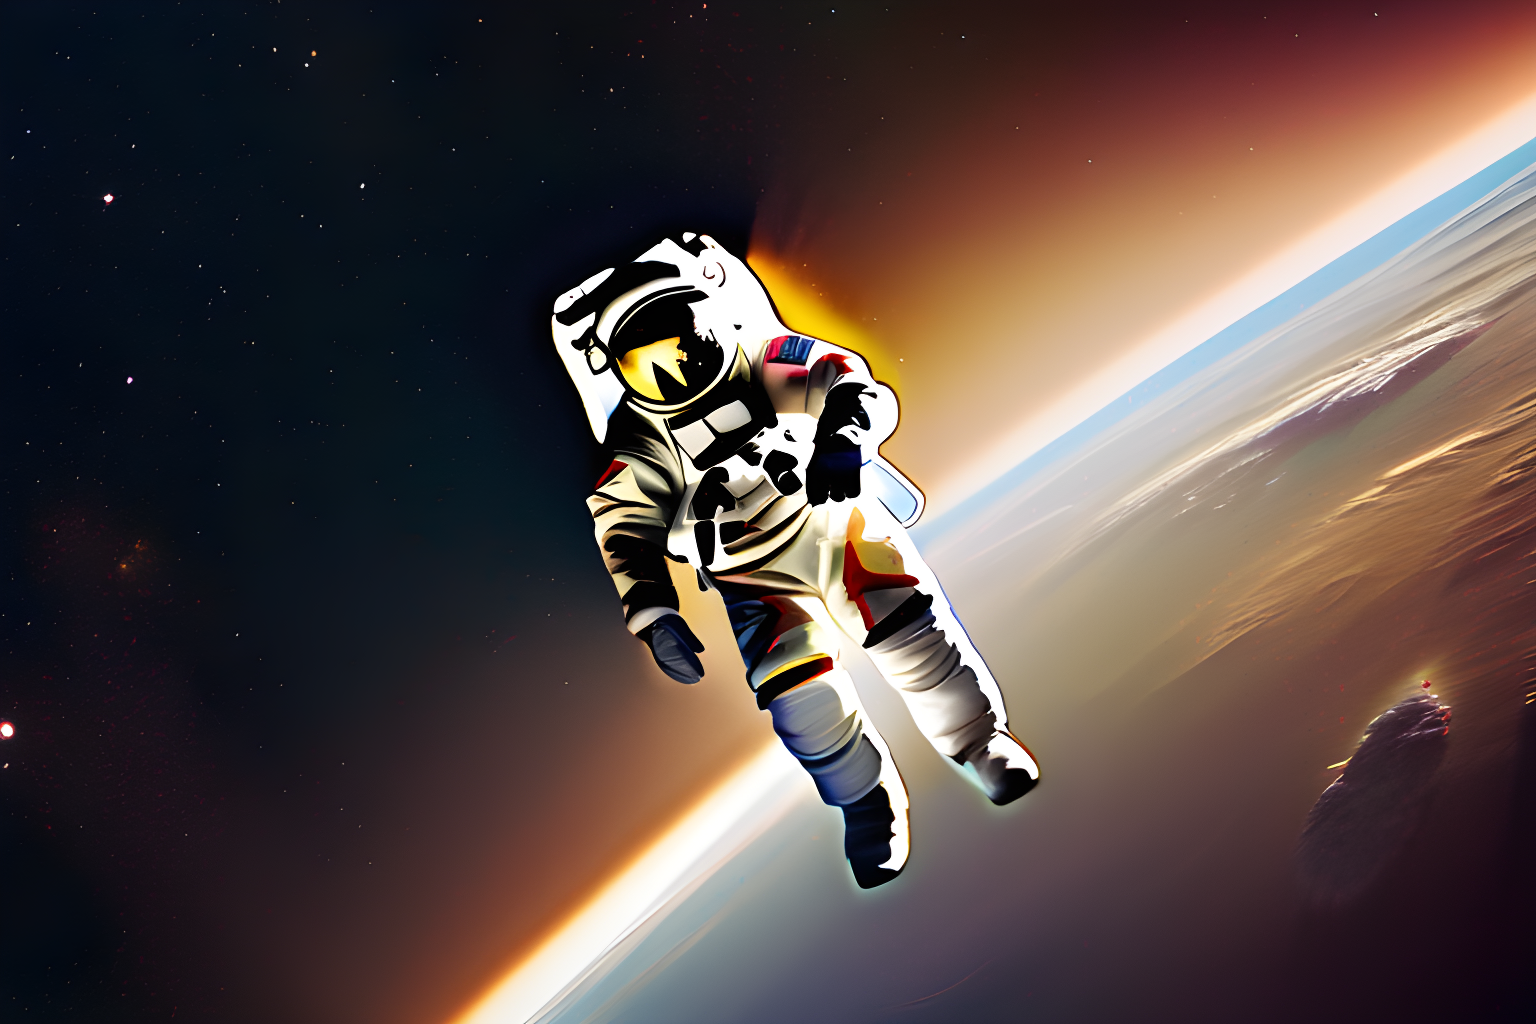 Photograph of a man in space